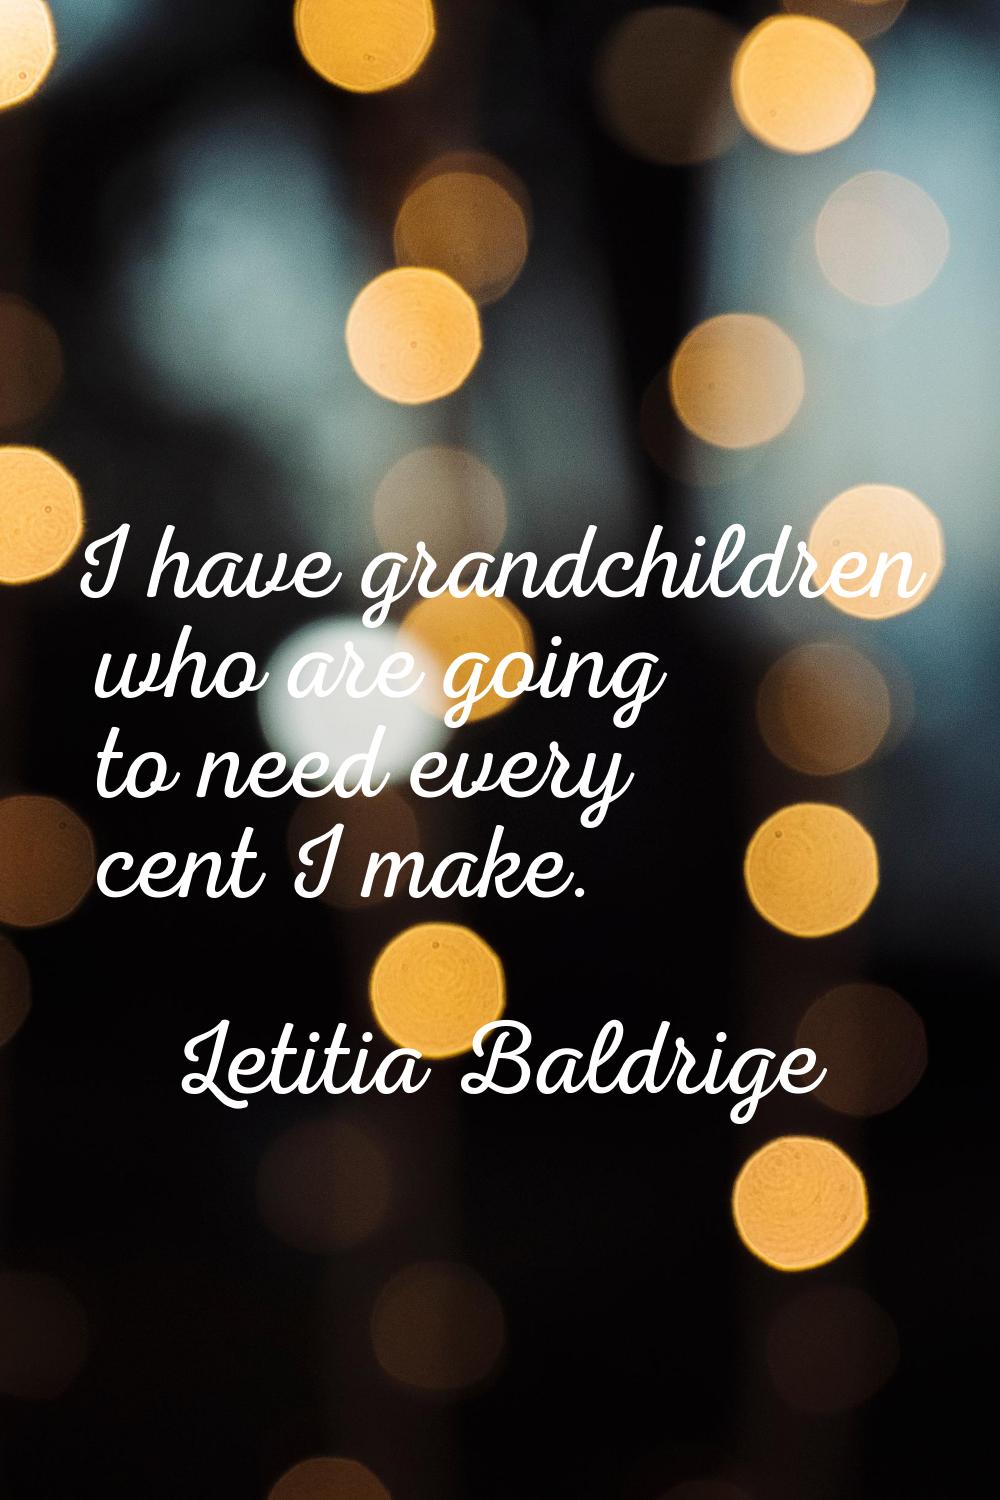 I have grandchildren who are going to need every cent I make.